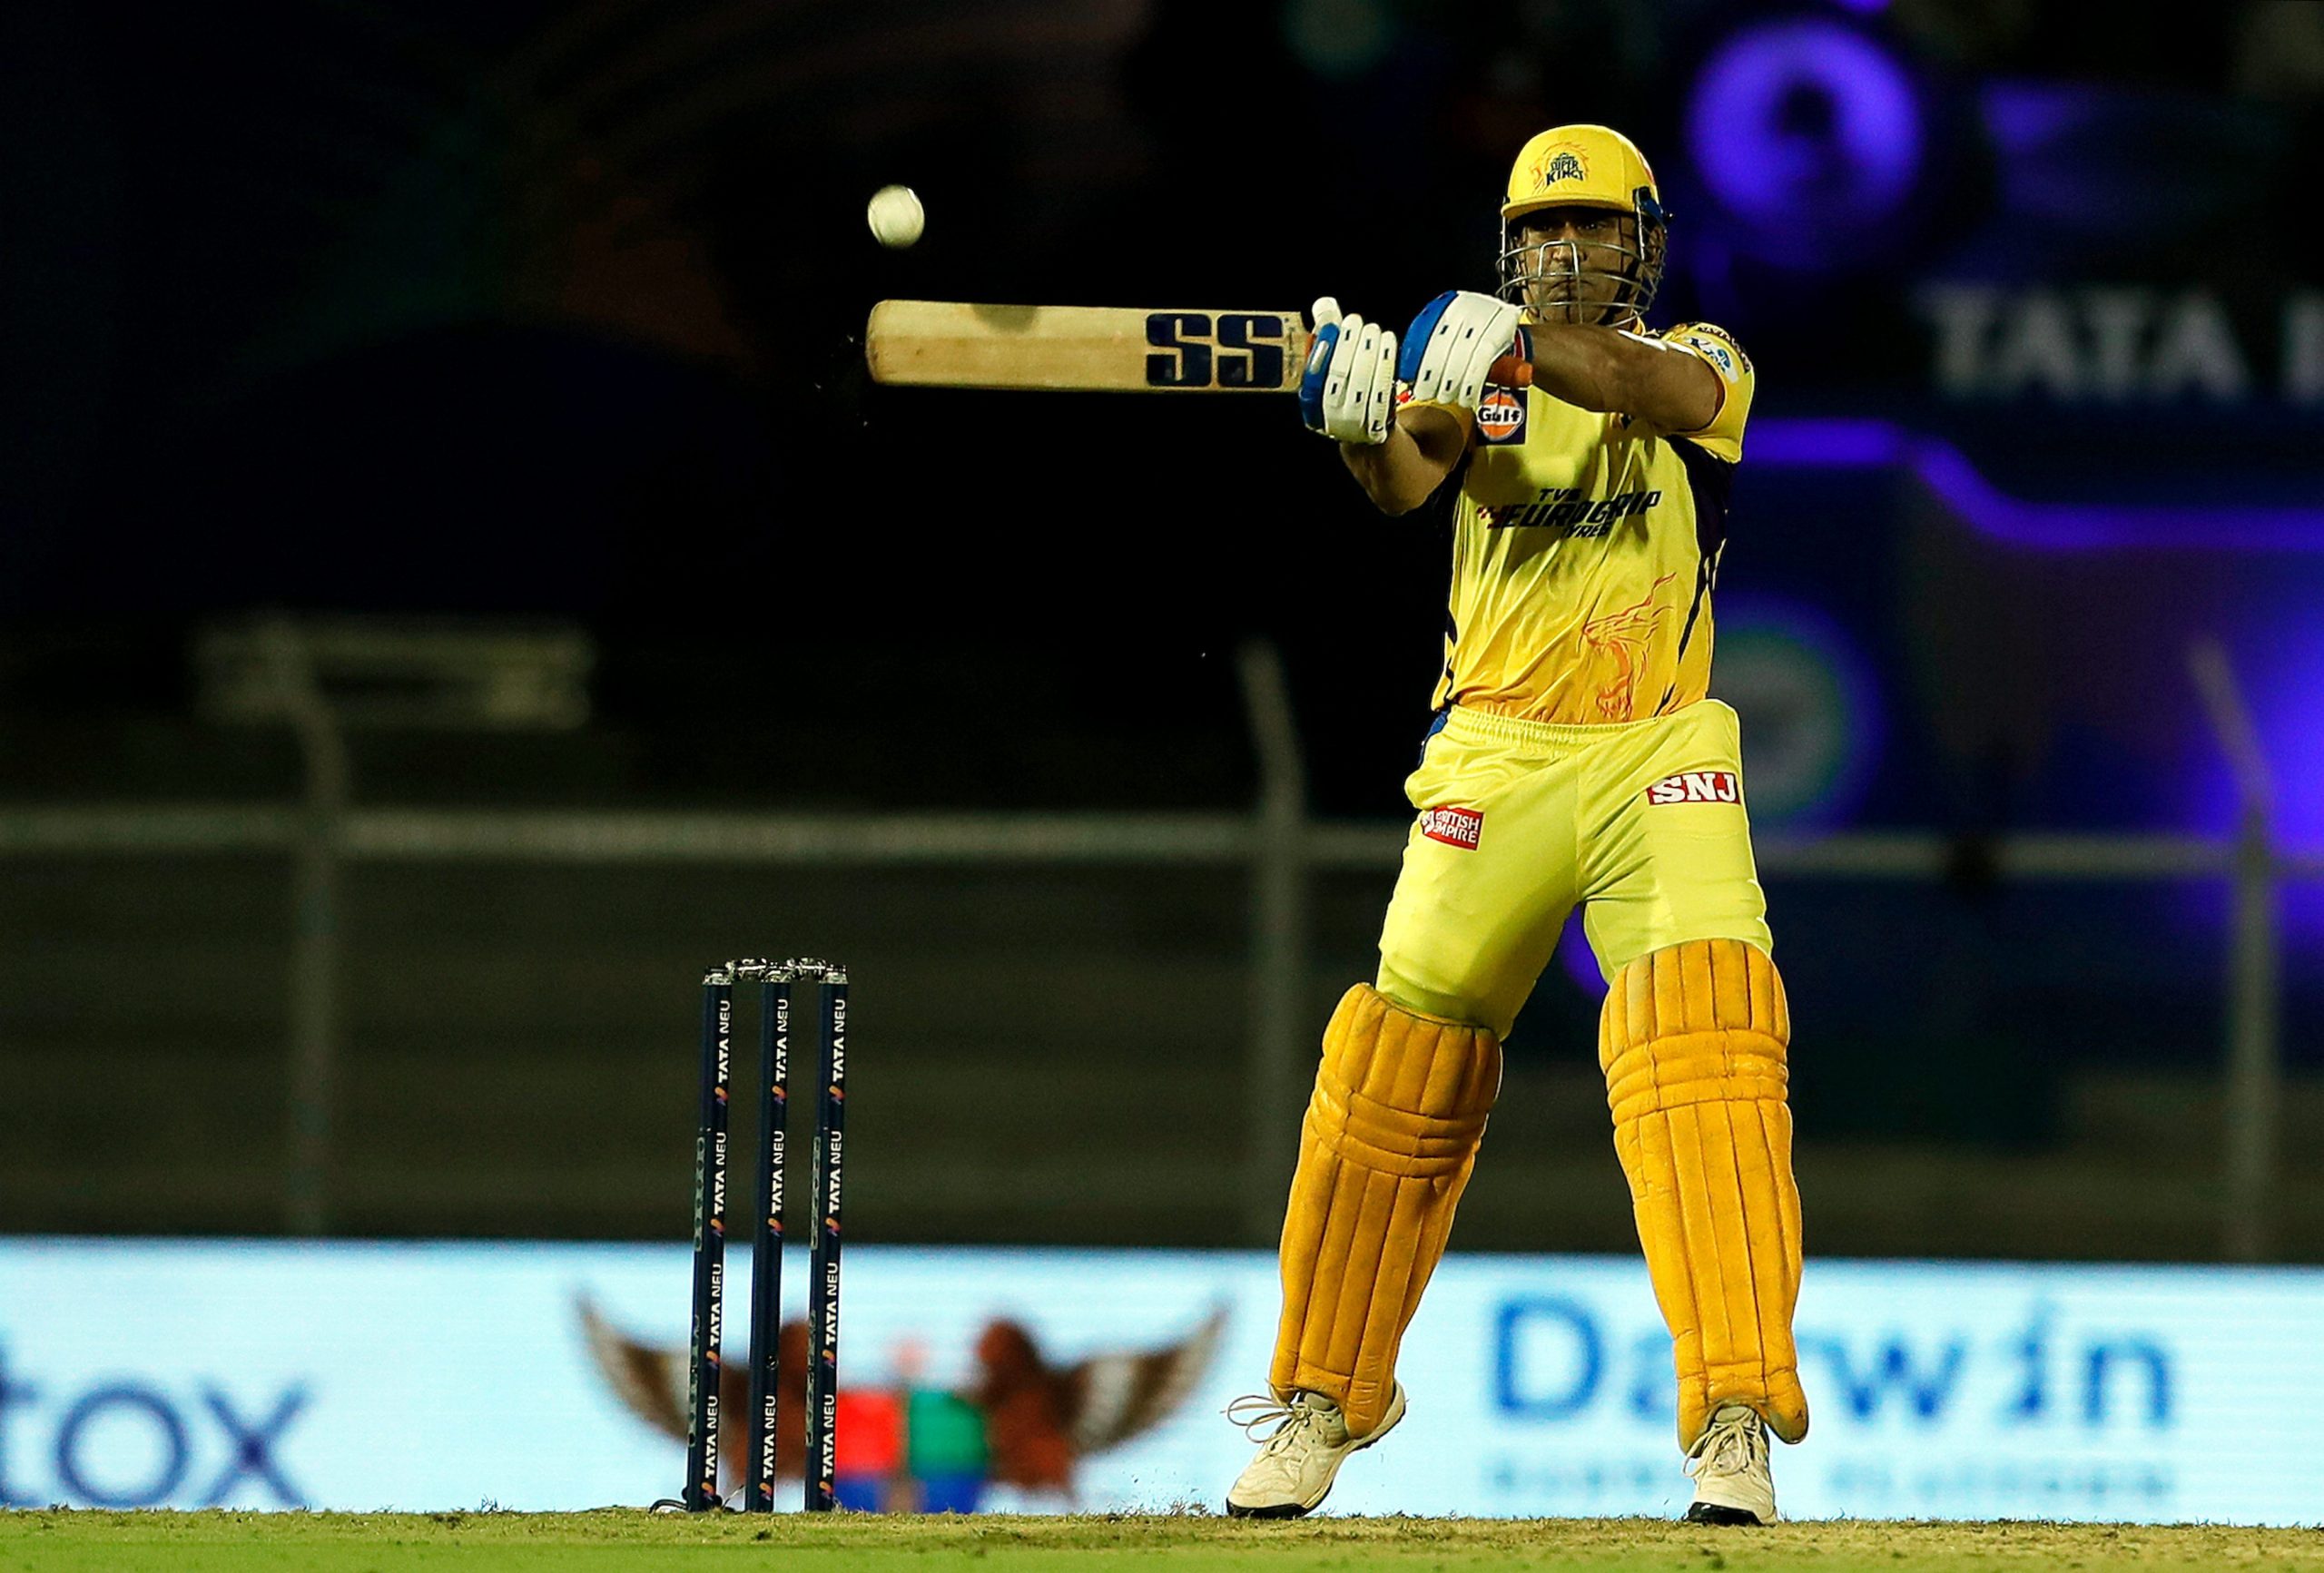 Dhoni’s first words back as CSK skipper: You’ll definitely see me in yellow